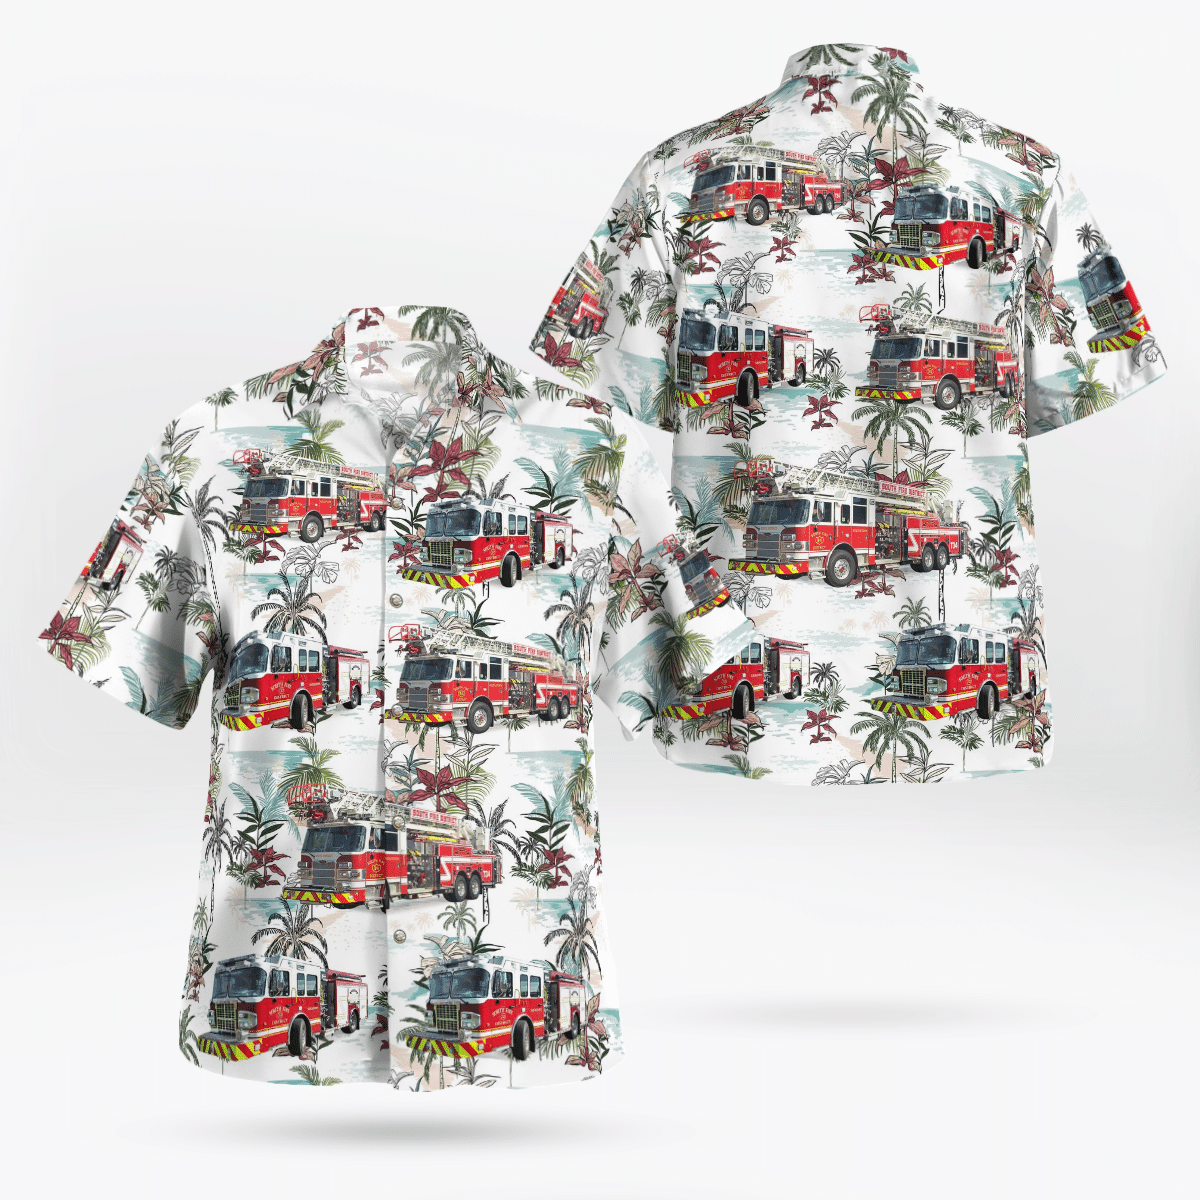 If you are in need of a new summertime look, pick up this Hawaiian shirt 18